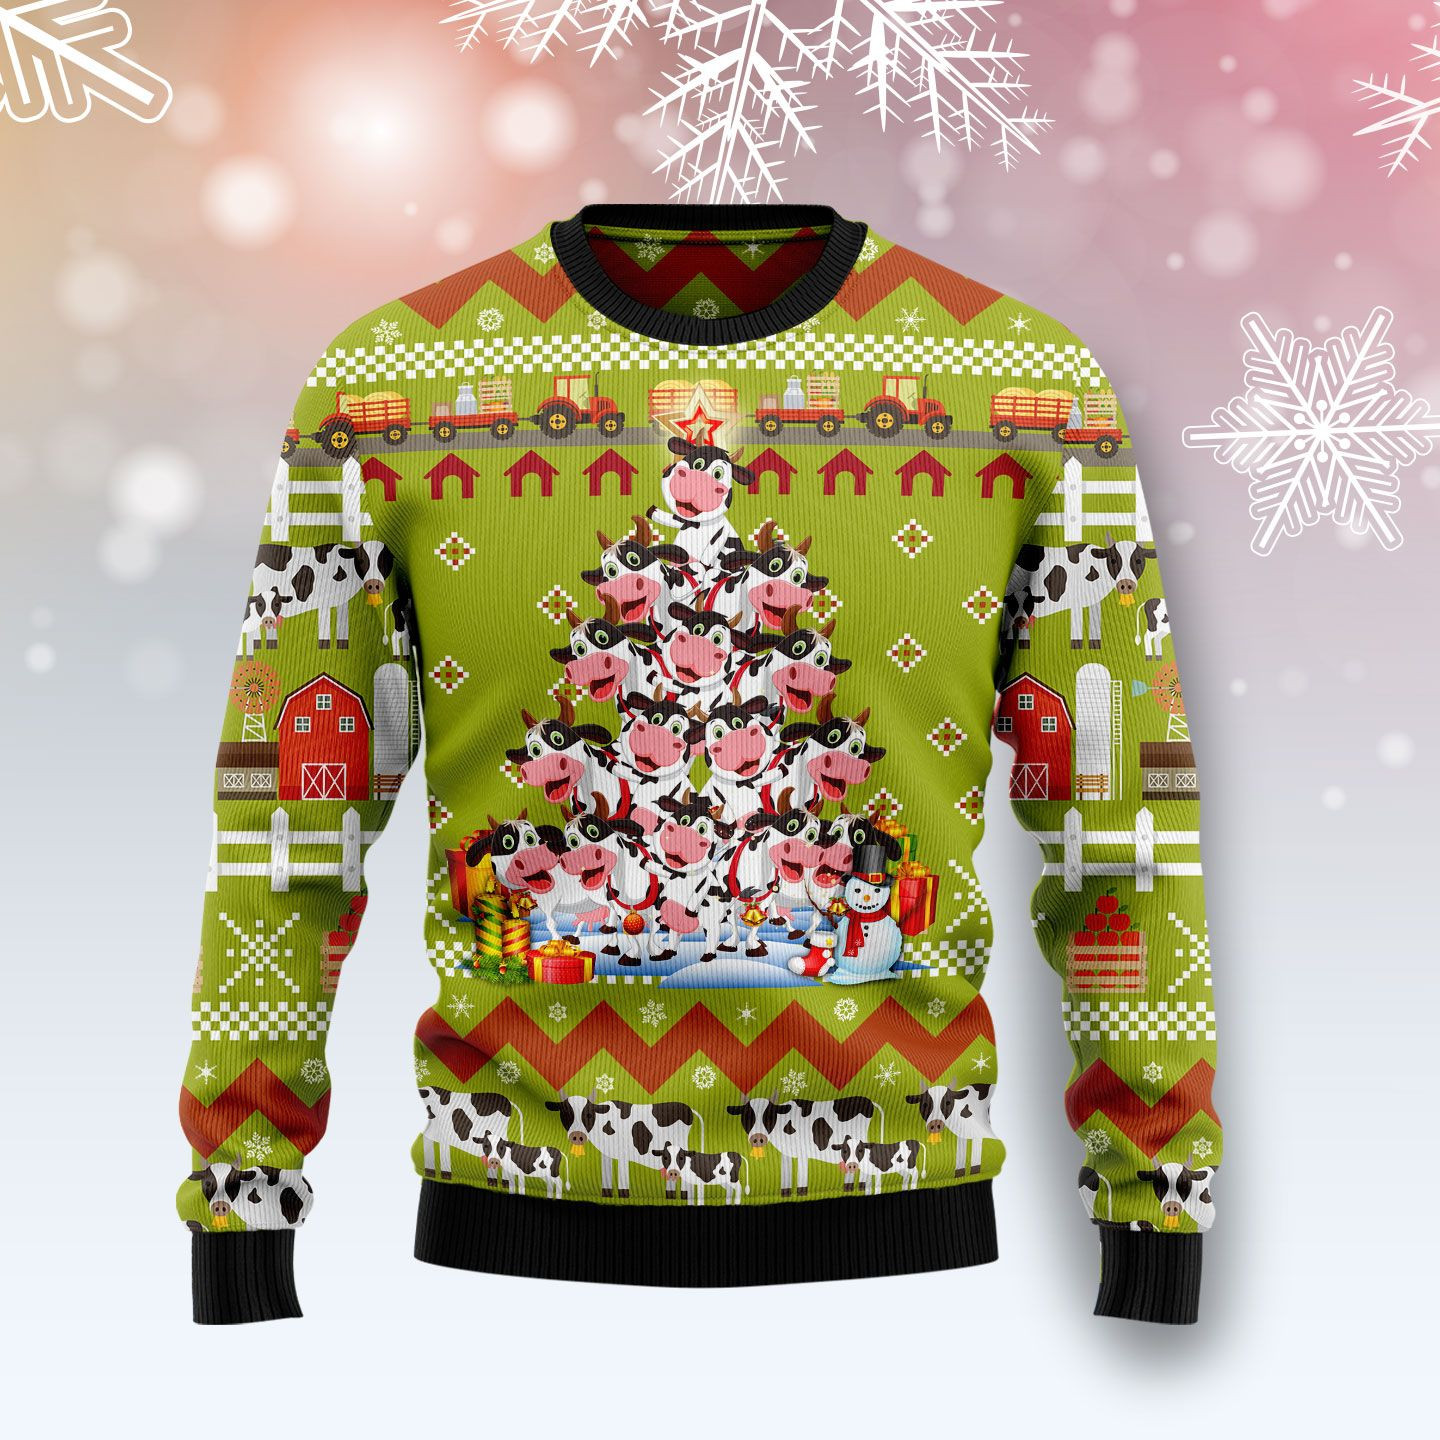 Cow Pine Tree Christmas Ugly Christmas Sweater, Ugly Sweater For Men Women, Holiday Sweater